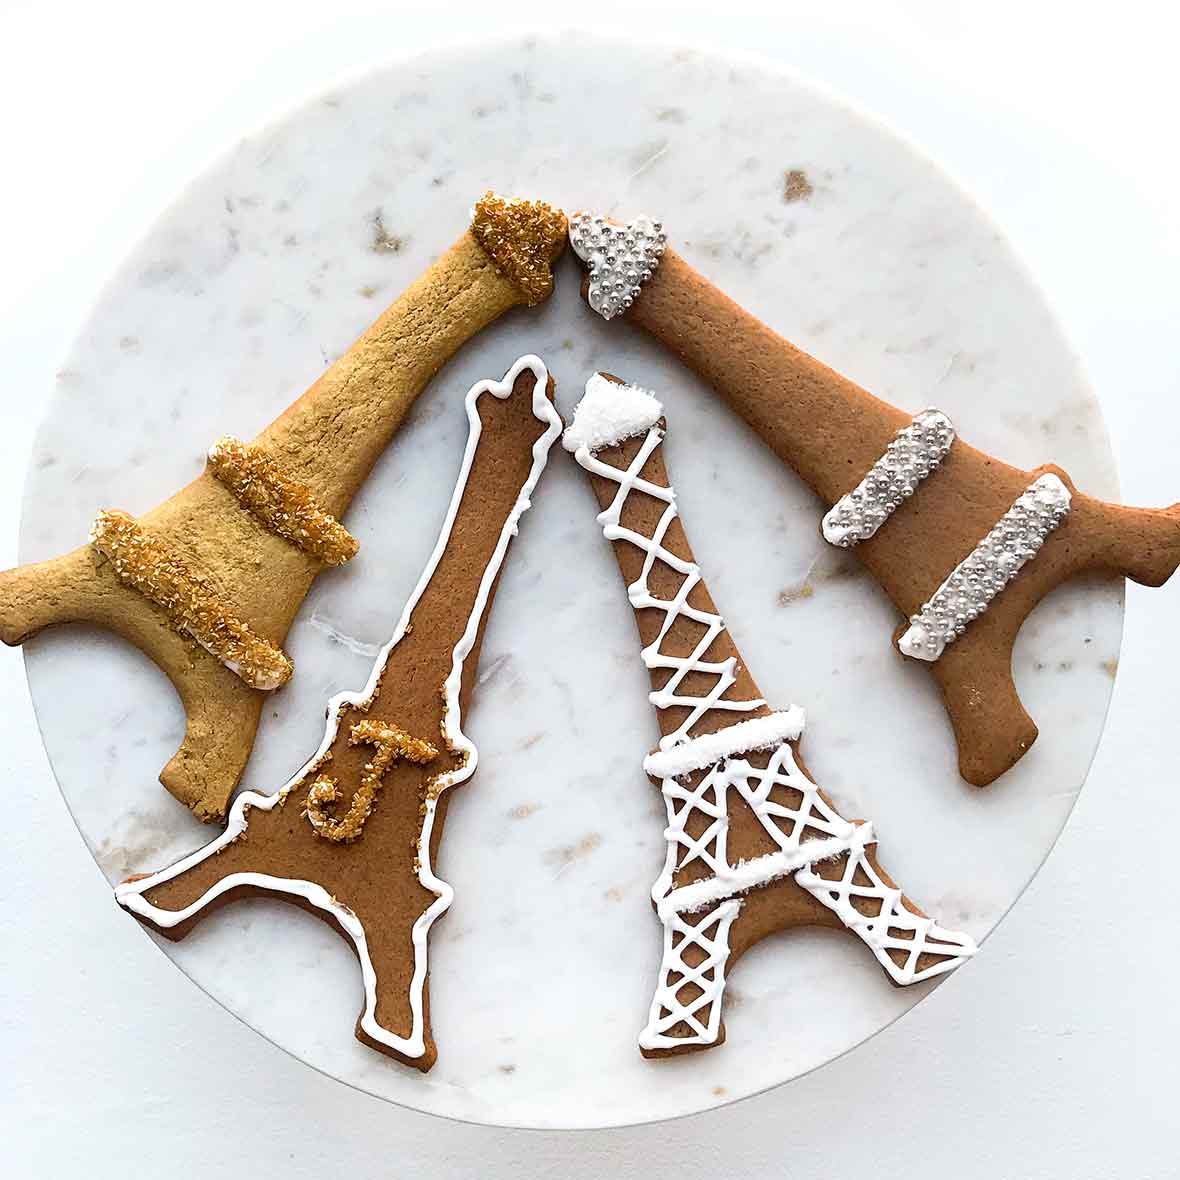 Four Swedish black pepper cookies called pepperkakor cut into Eiffel Tower shapes and decorated